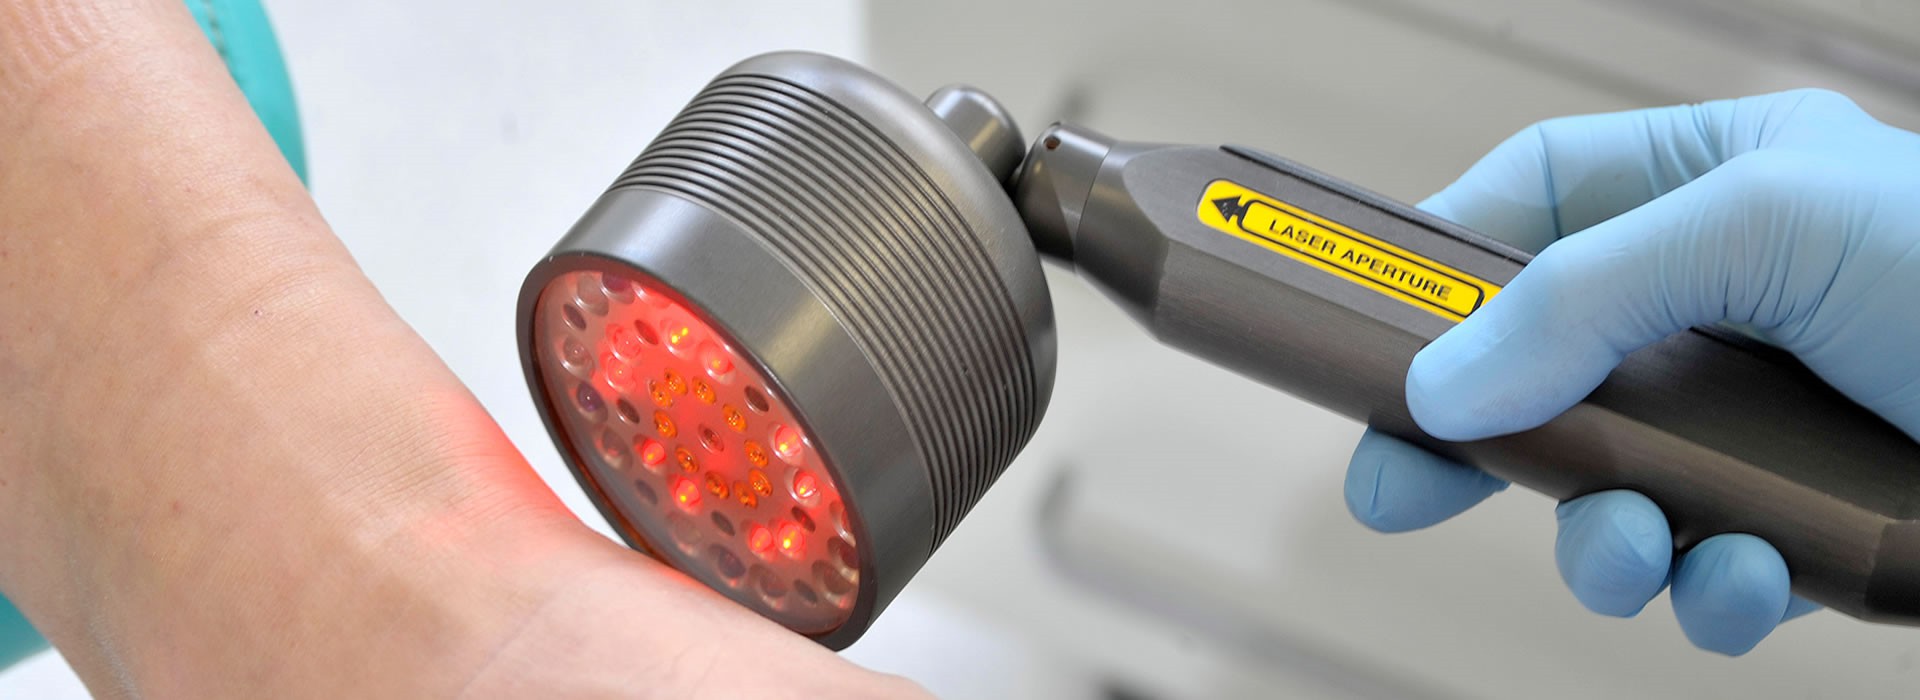 Cold Laser Therapy - Enhancing the progress of healing.